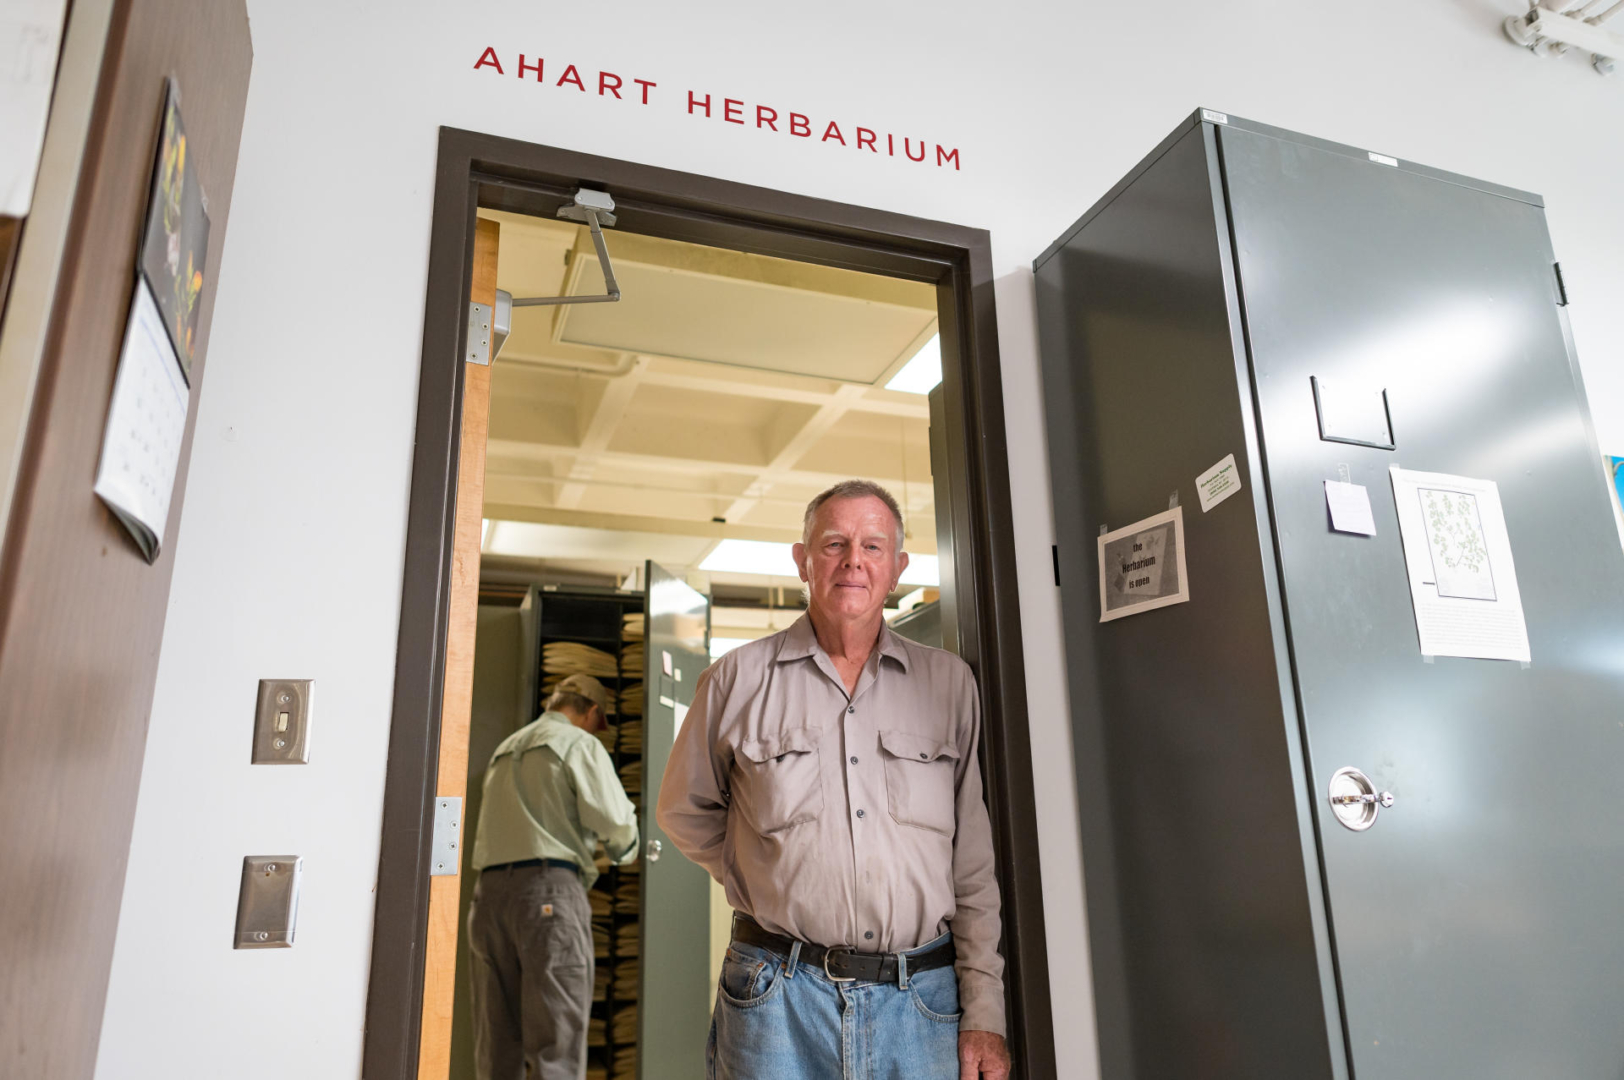 Lowell Ahart stands in the doorway of the Ahart Herbarium, once its new formal name was added above the doorway. 